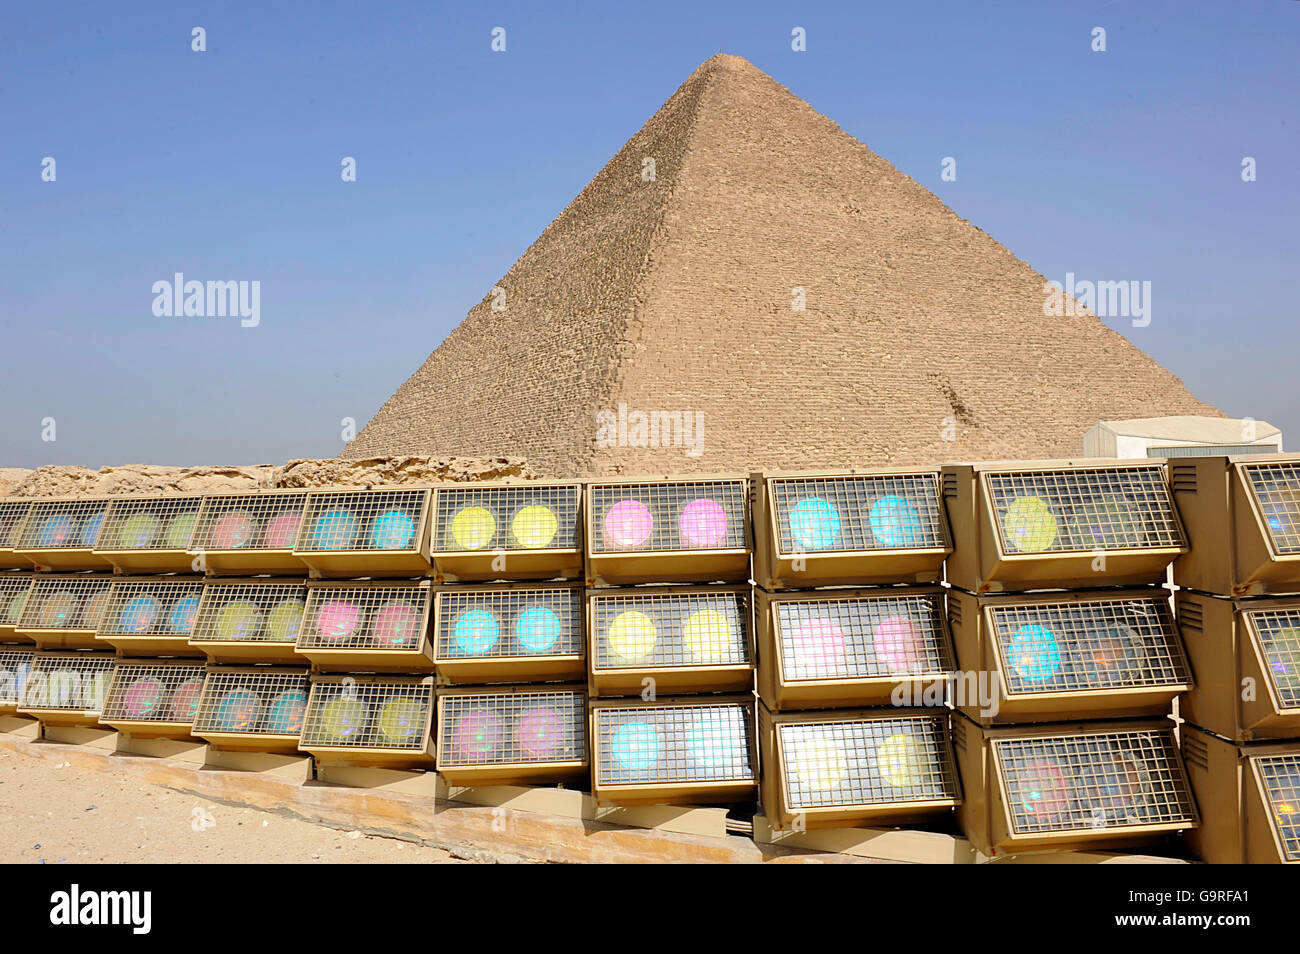 The Great Pyramid of Giza, lamps for light show, Pyramids of Giza, Giza, Egypt / Pyramid of Khufu Stock Photo